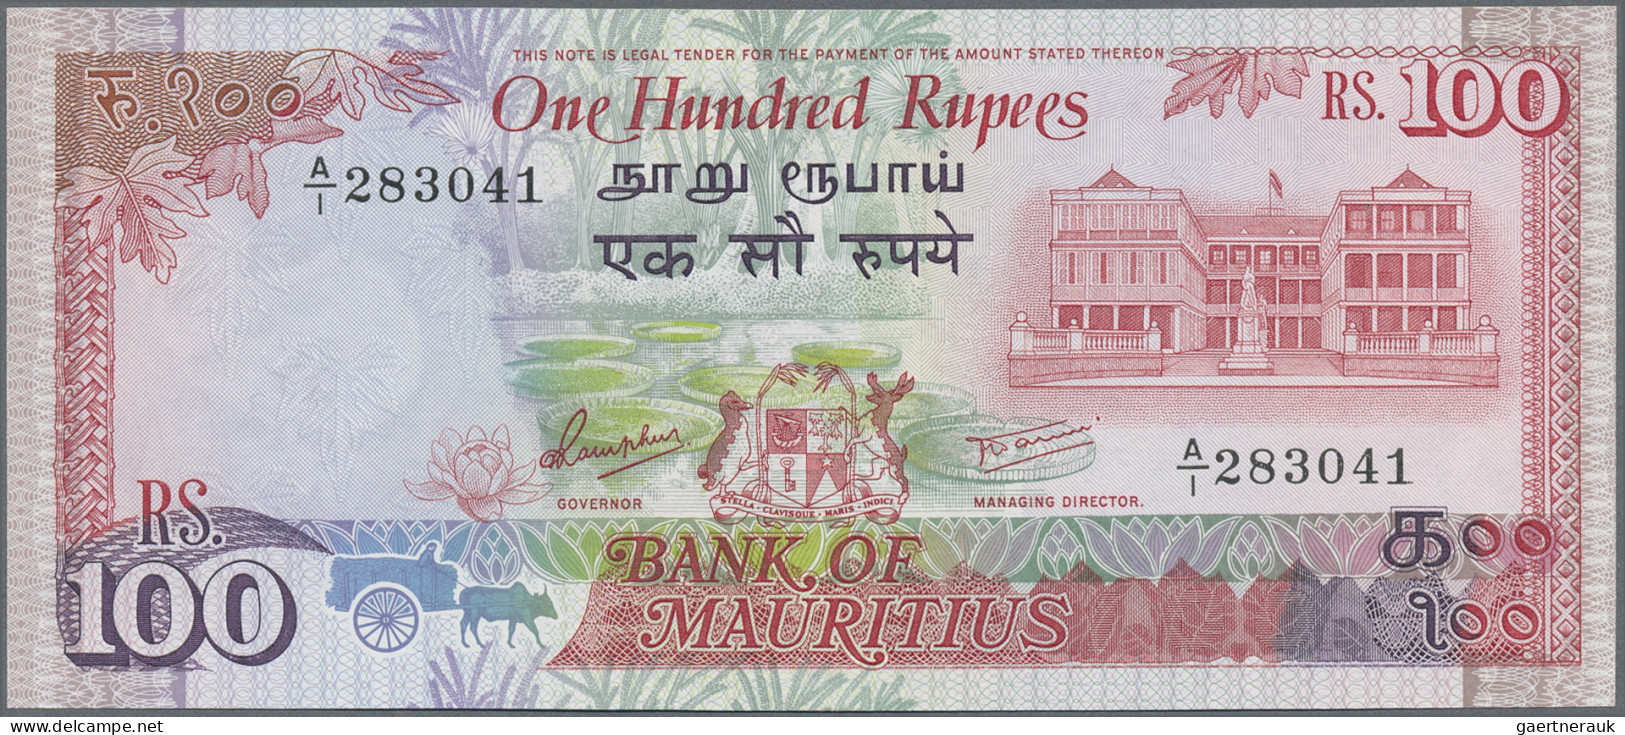 Mauritius: Bank of Mauritius, lot with 5 banknotes, series 1985/86, with 5 Rupee